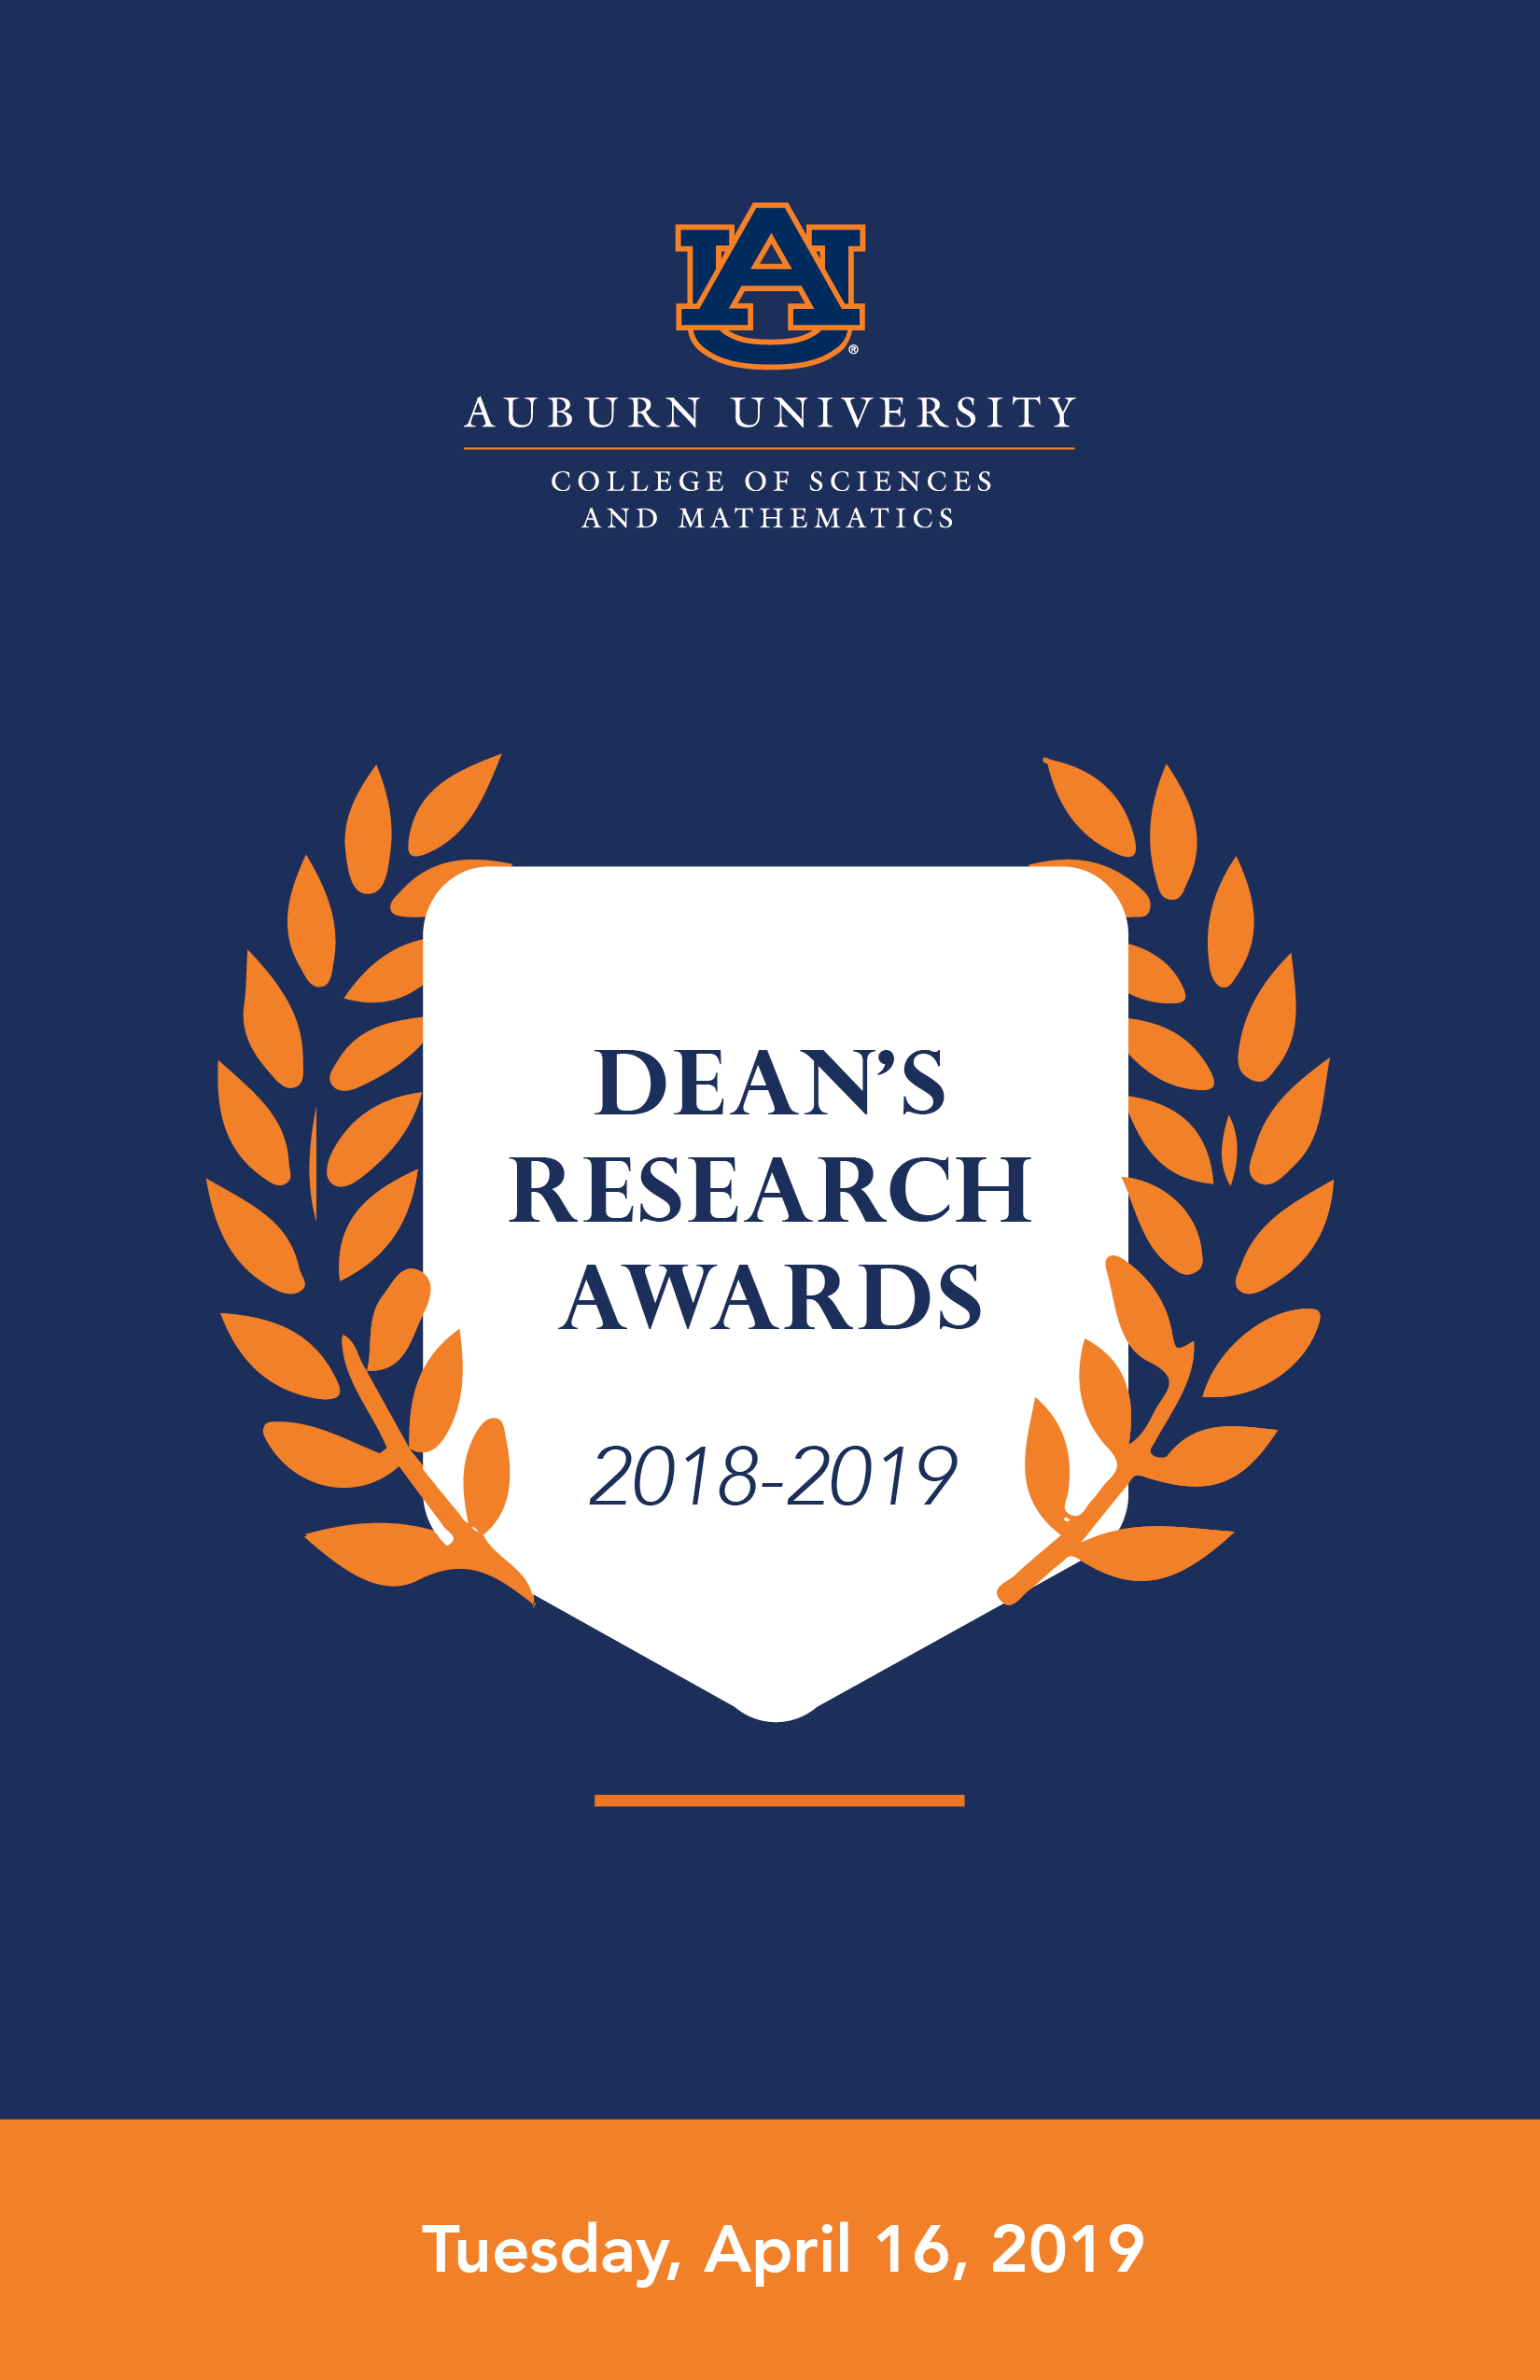 Dean's Research Awards 